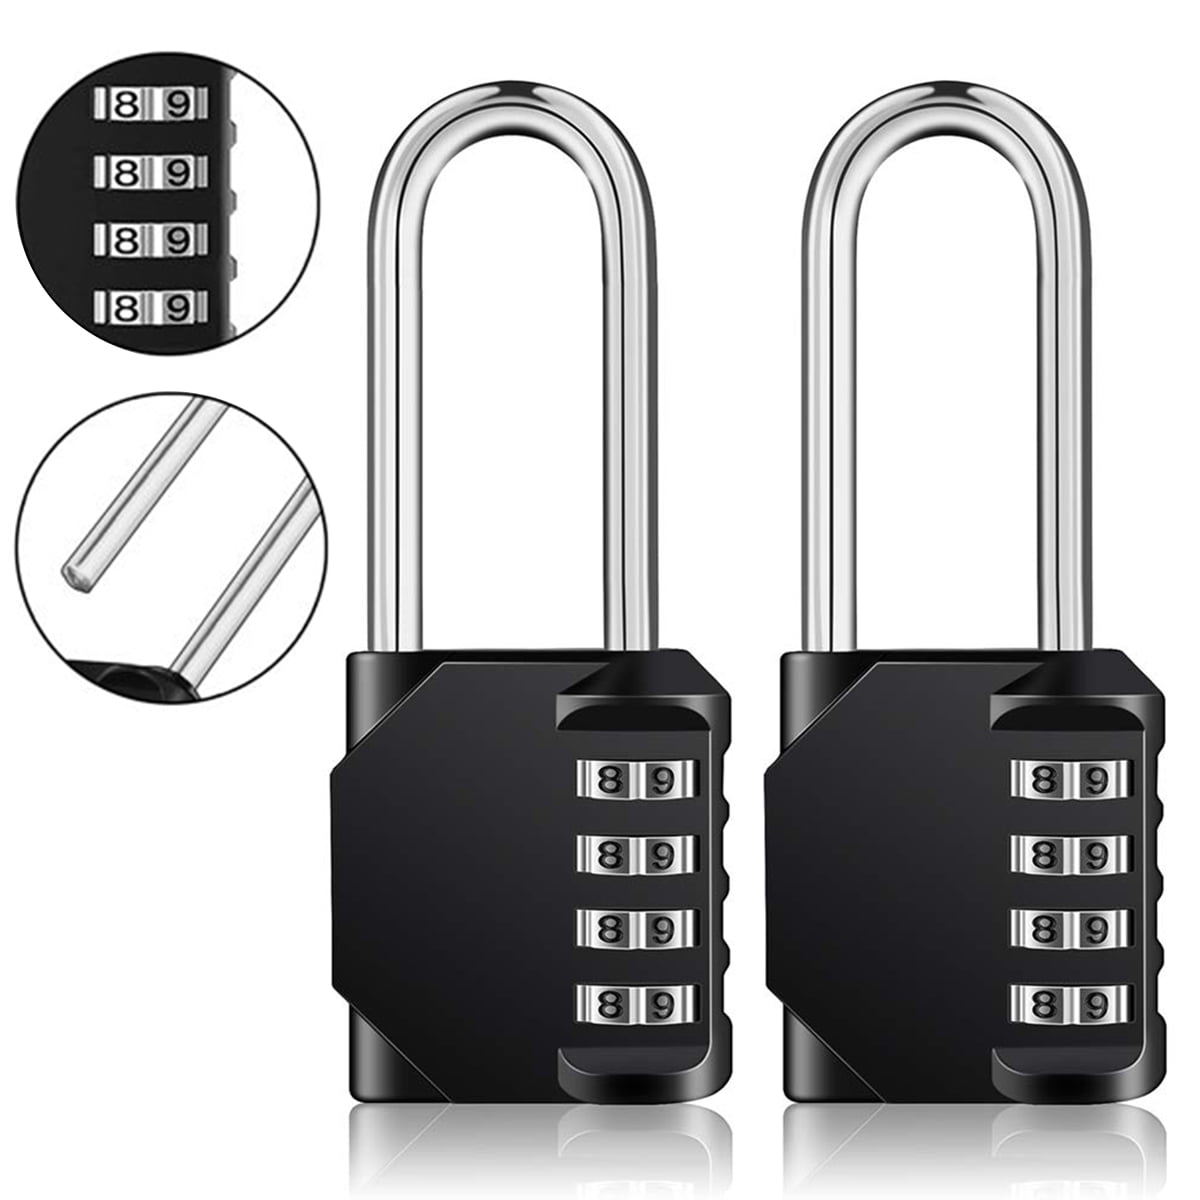 Sports Indoor & Outdoor Locker - Easy to Set Your Own Combination Resettable Keyless Padlock for Gym Storage Fence and Hasp 2 Packs - Black KAWAHA 4-Digit Combination Lock